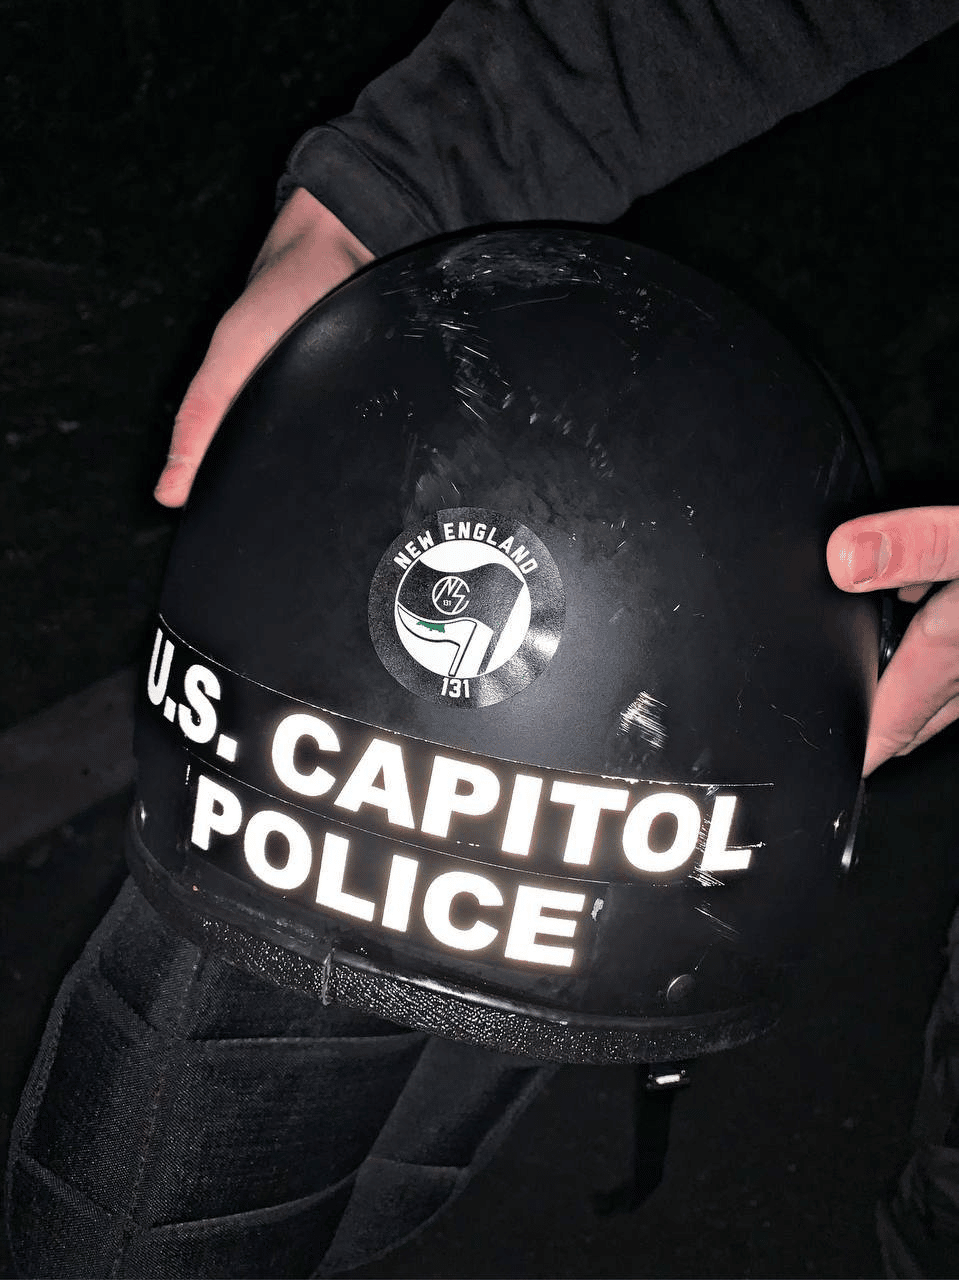 (Photos) Right-Wing Extremists Circulate Photos of a Helmet Celebrating the Anniversary of January 6 Capitol Siege in Washington DC, United States - 6 January 2023